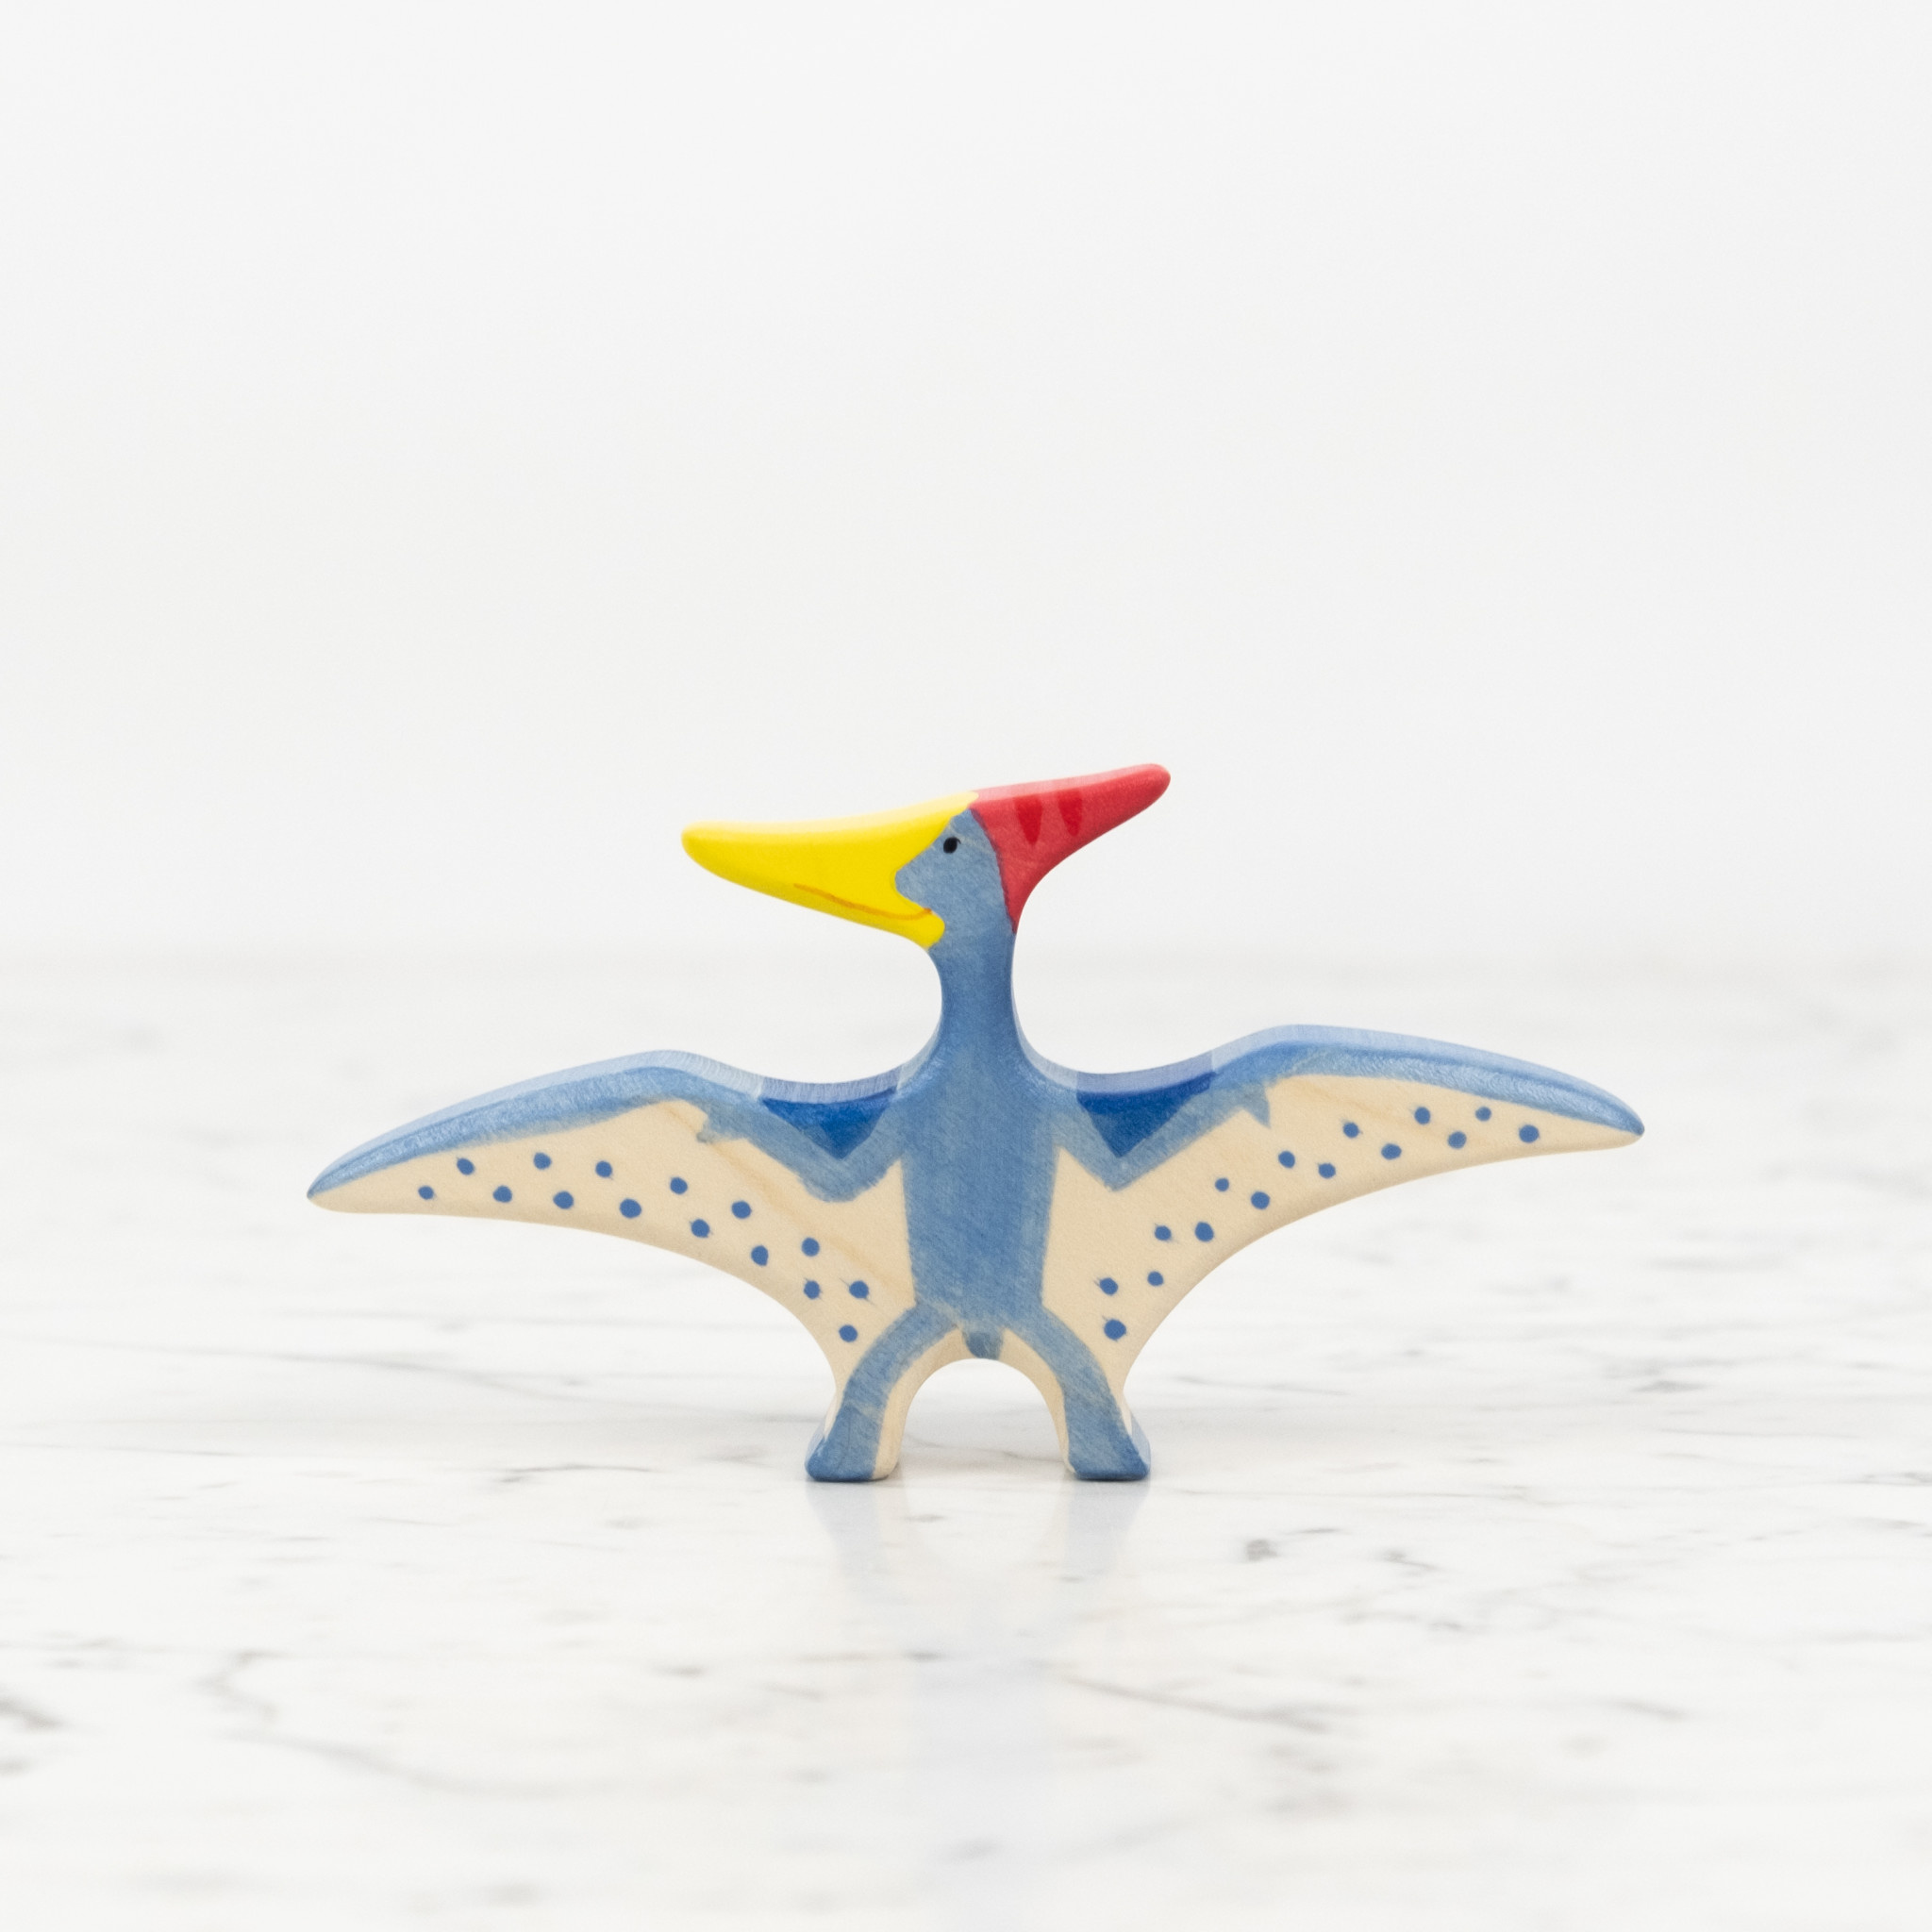 Flying Blue Pteranodon Dinosaur with Red Crest and Yellow Beak